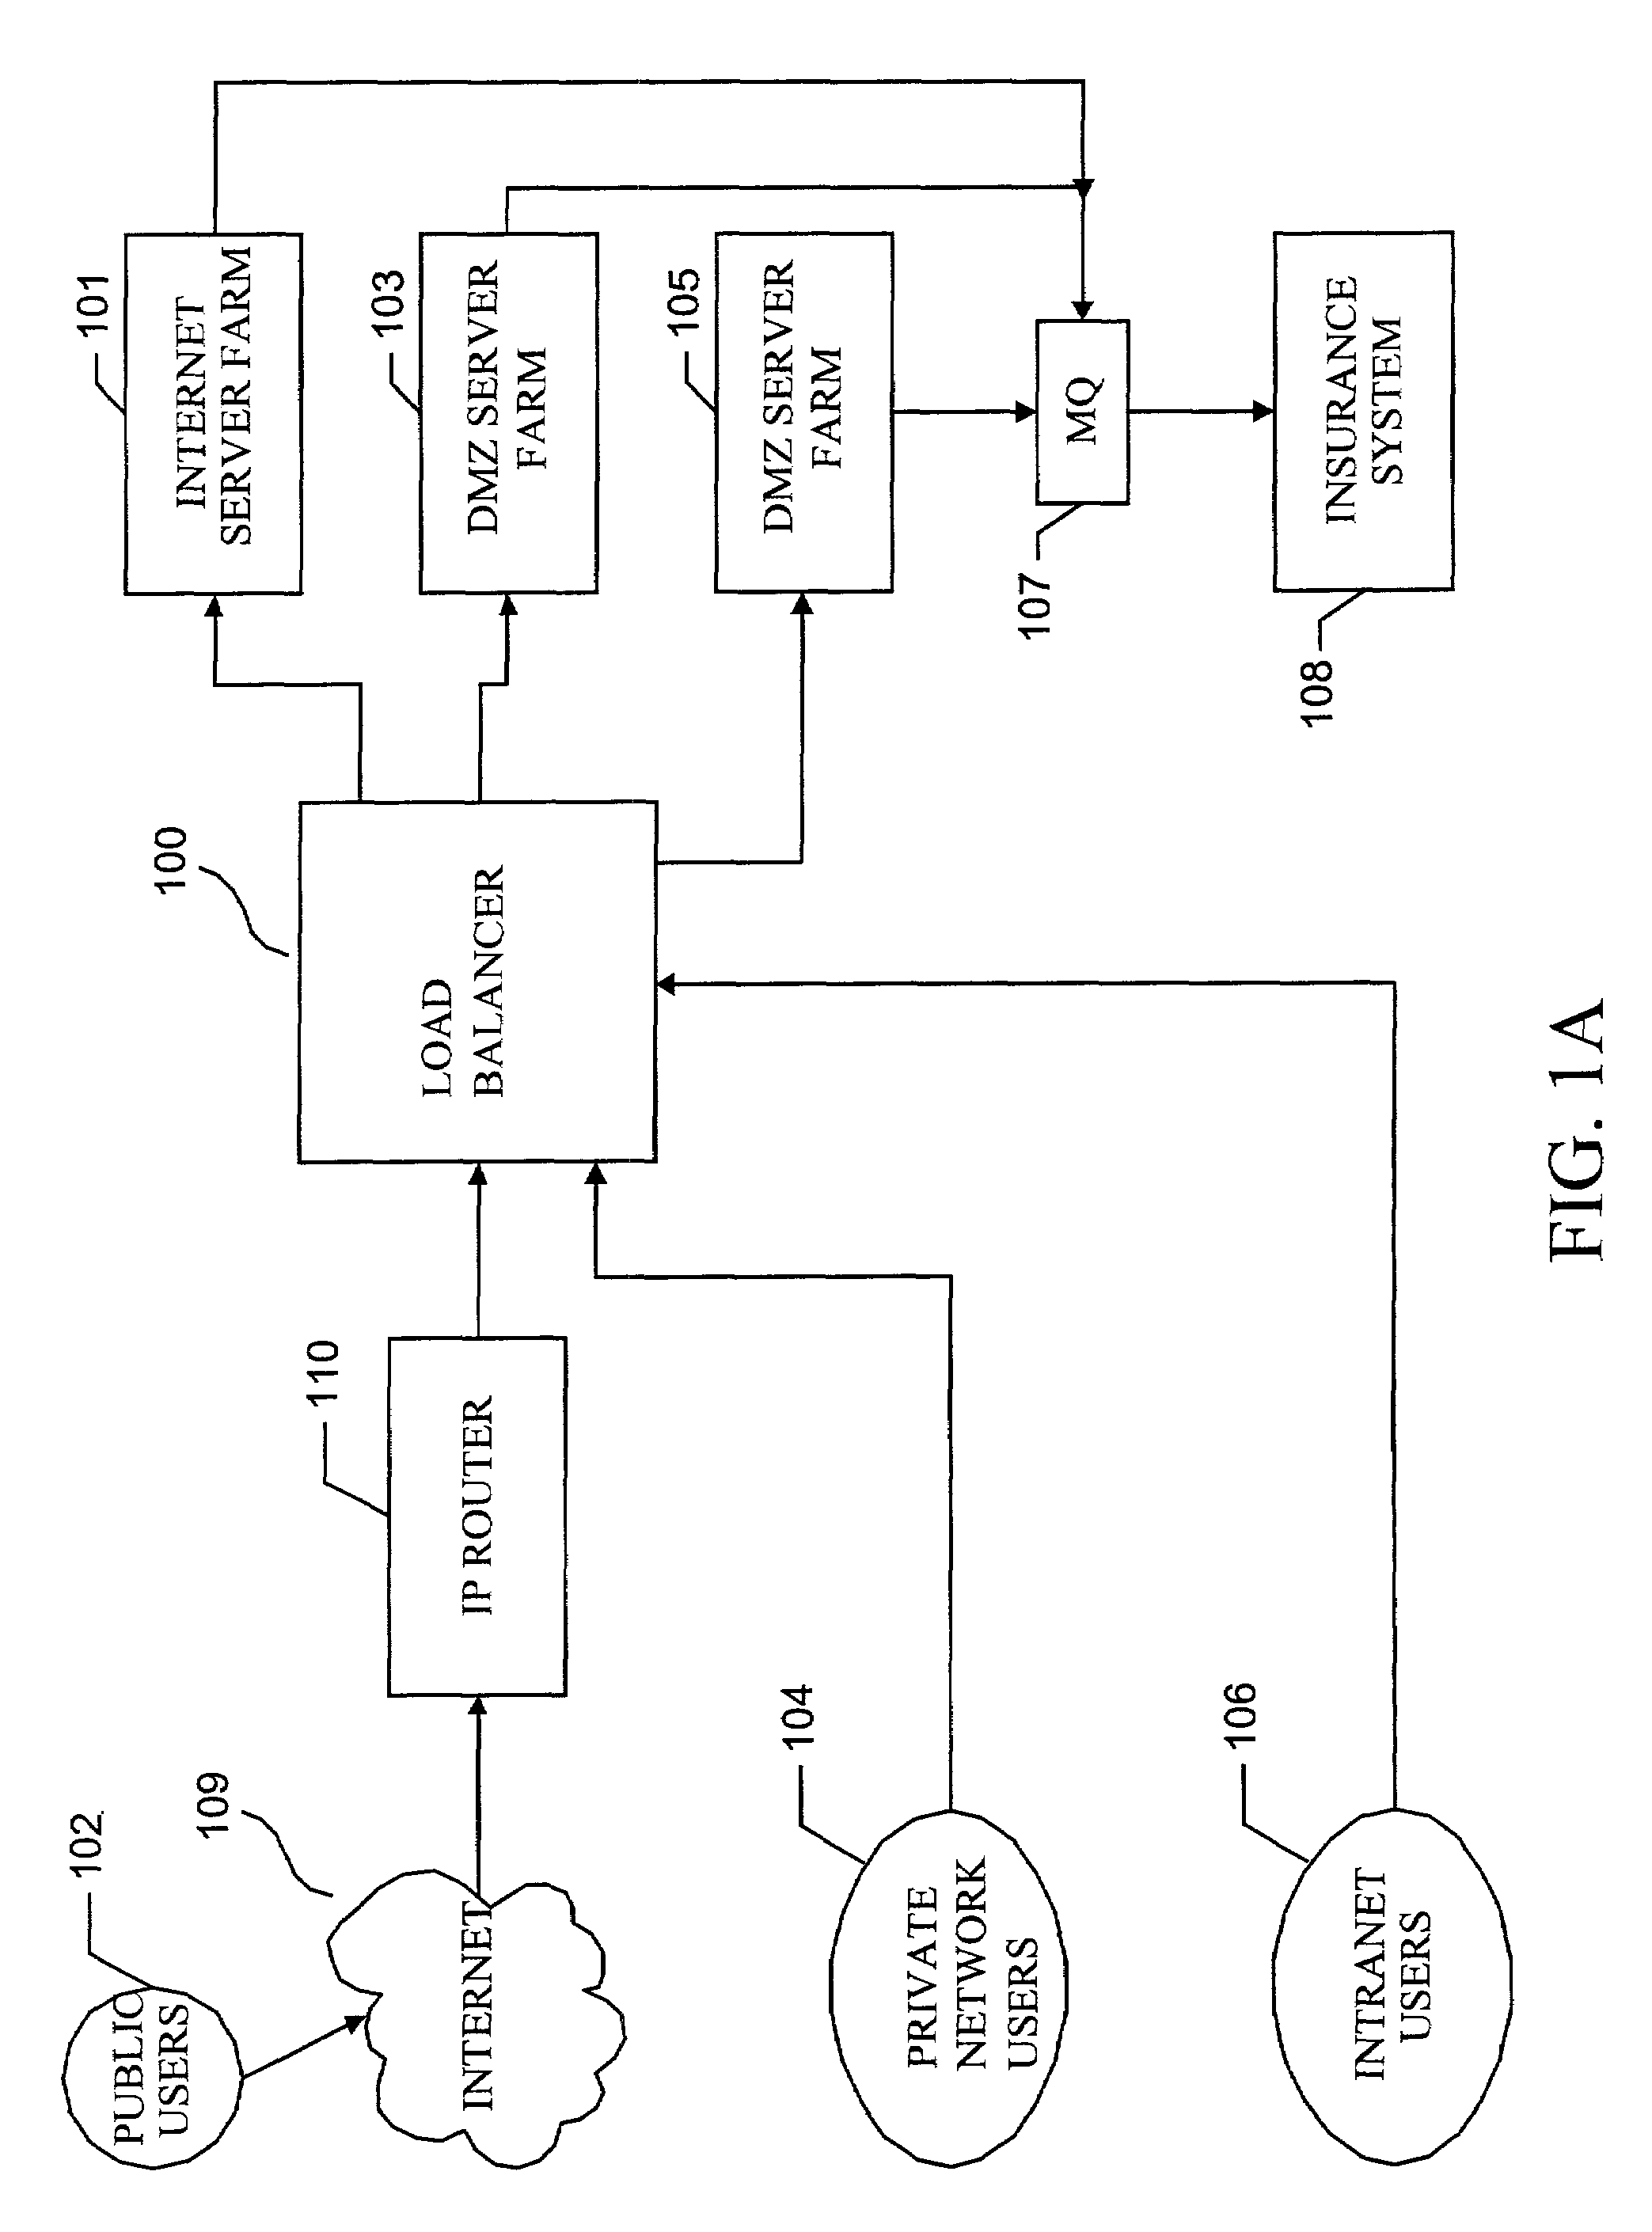 Method for providing web-based insurance data processing services to users